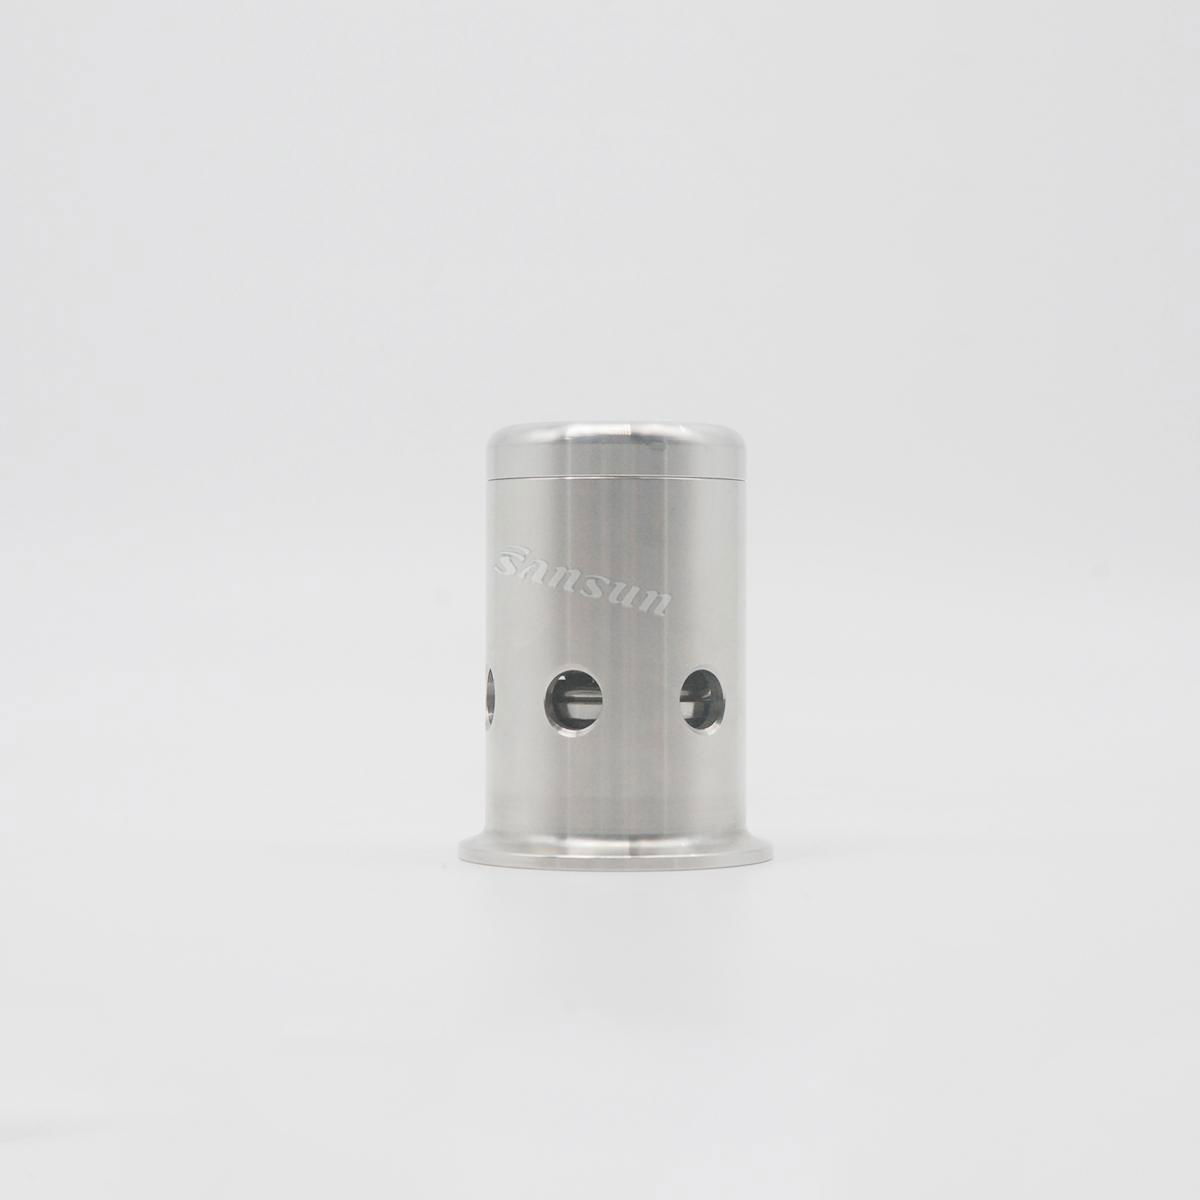 Sanitary safety relief valve stainless steel air release Valve 5